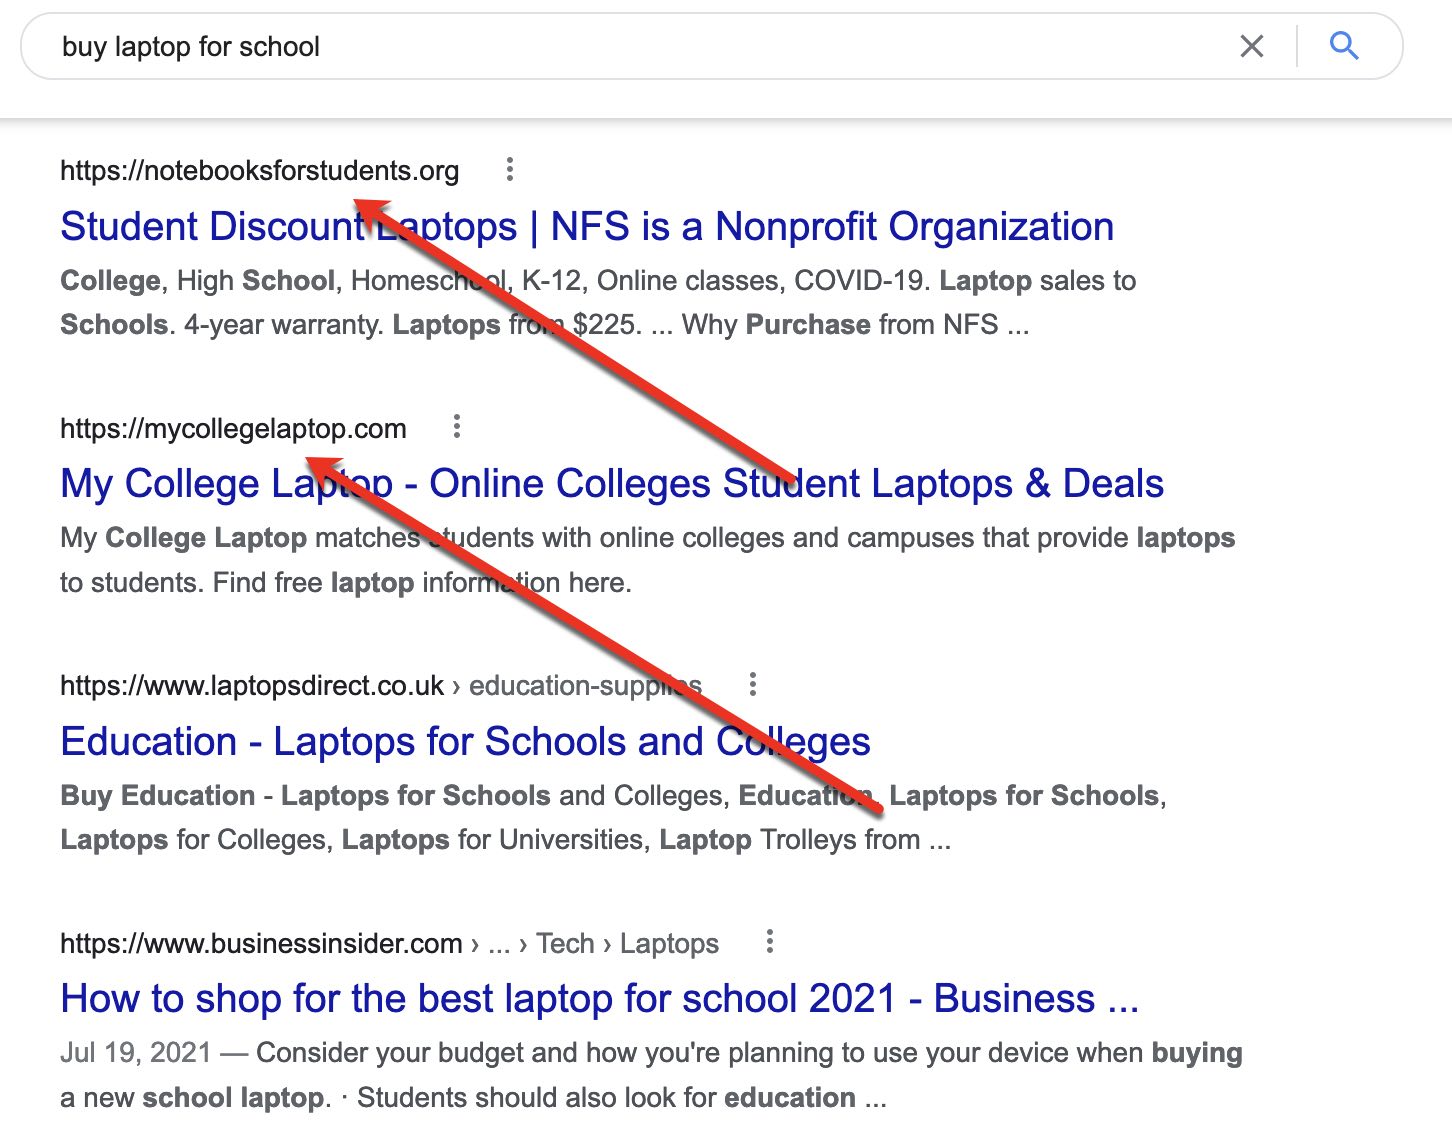 Screenshot of Google search results for "buy laptop for school"